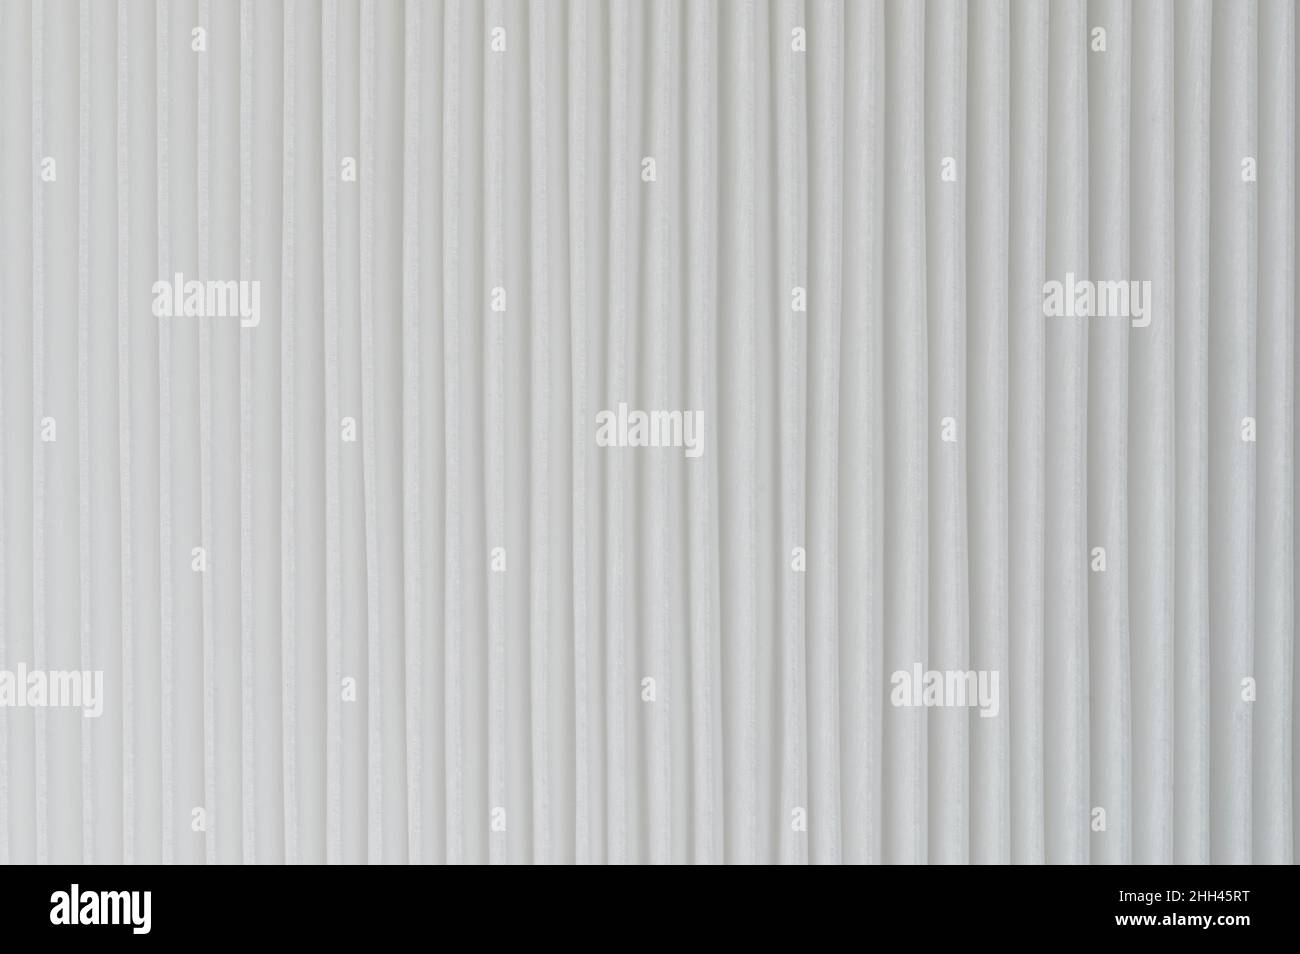 White hepa filter background pattern close up view Stock Photo